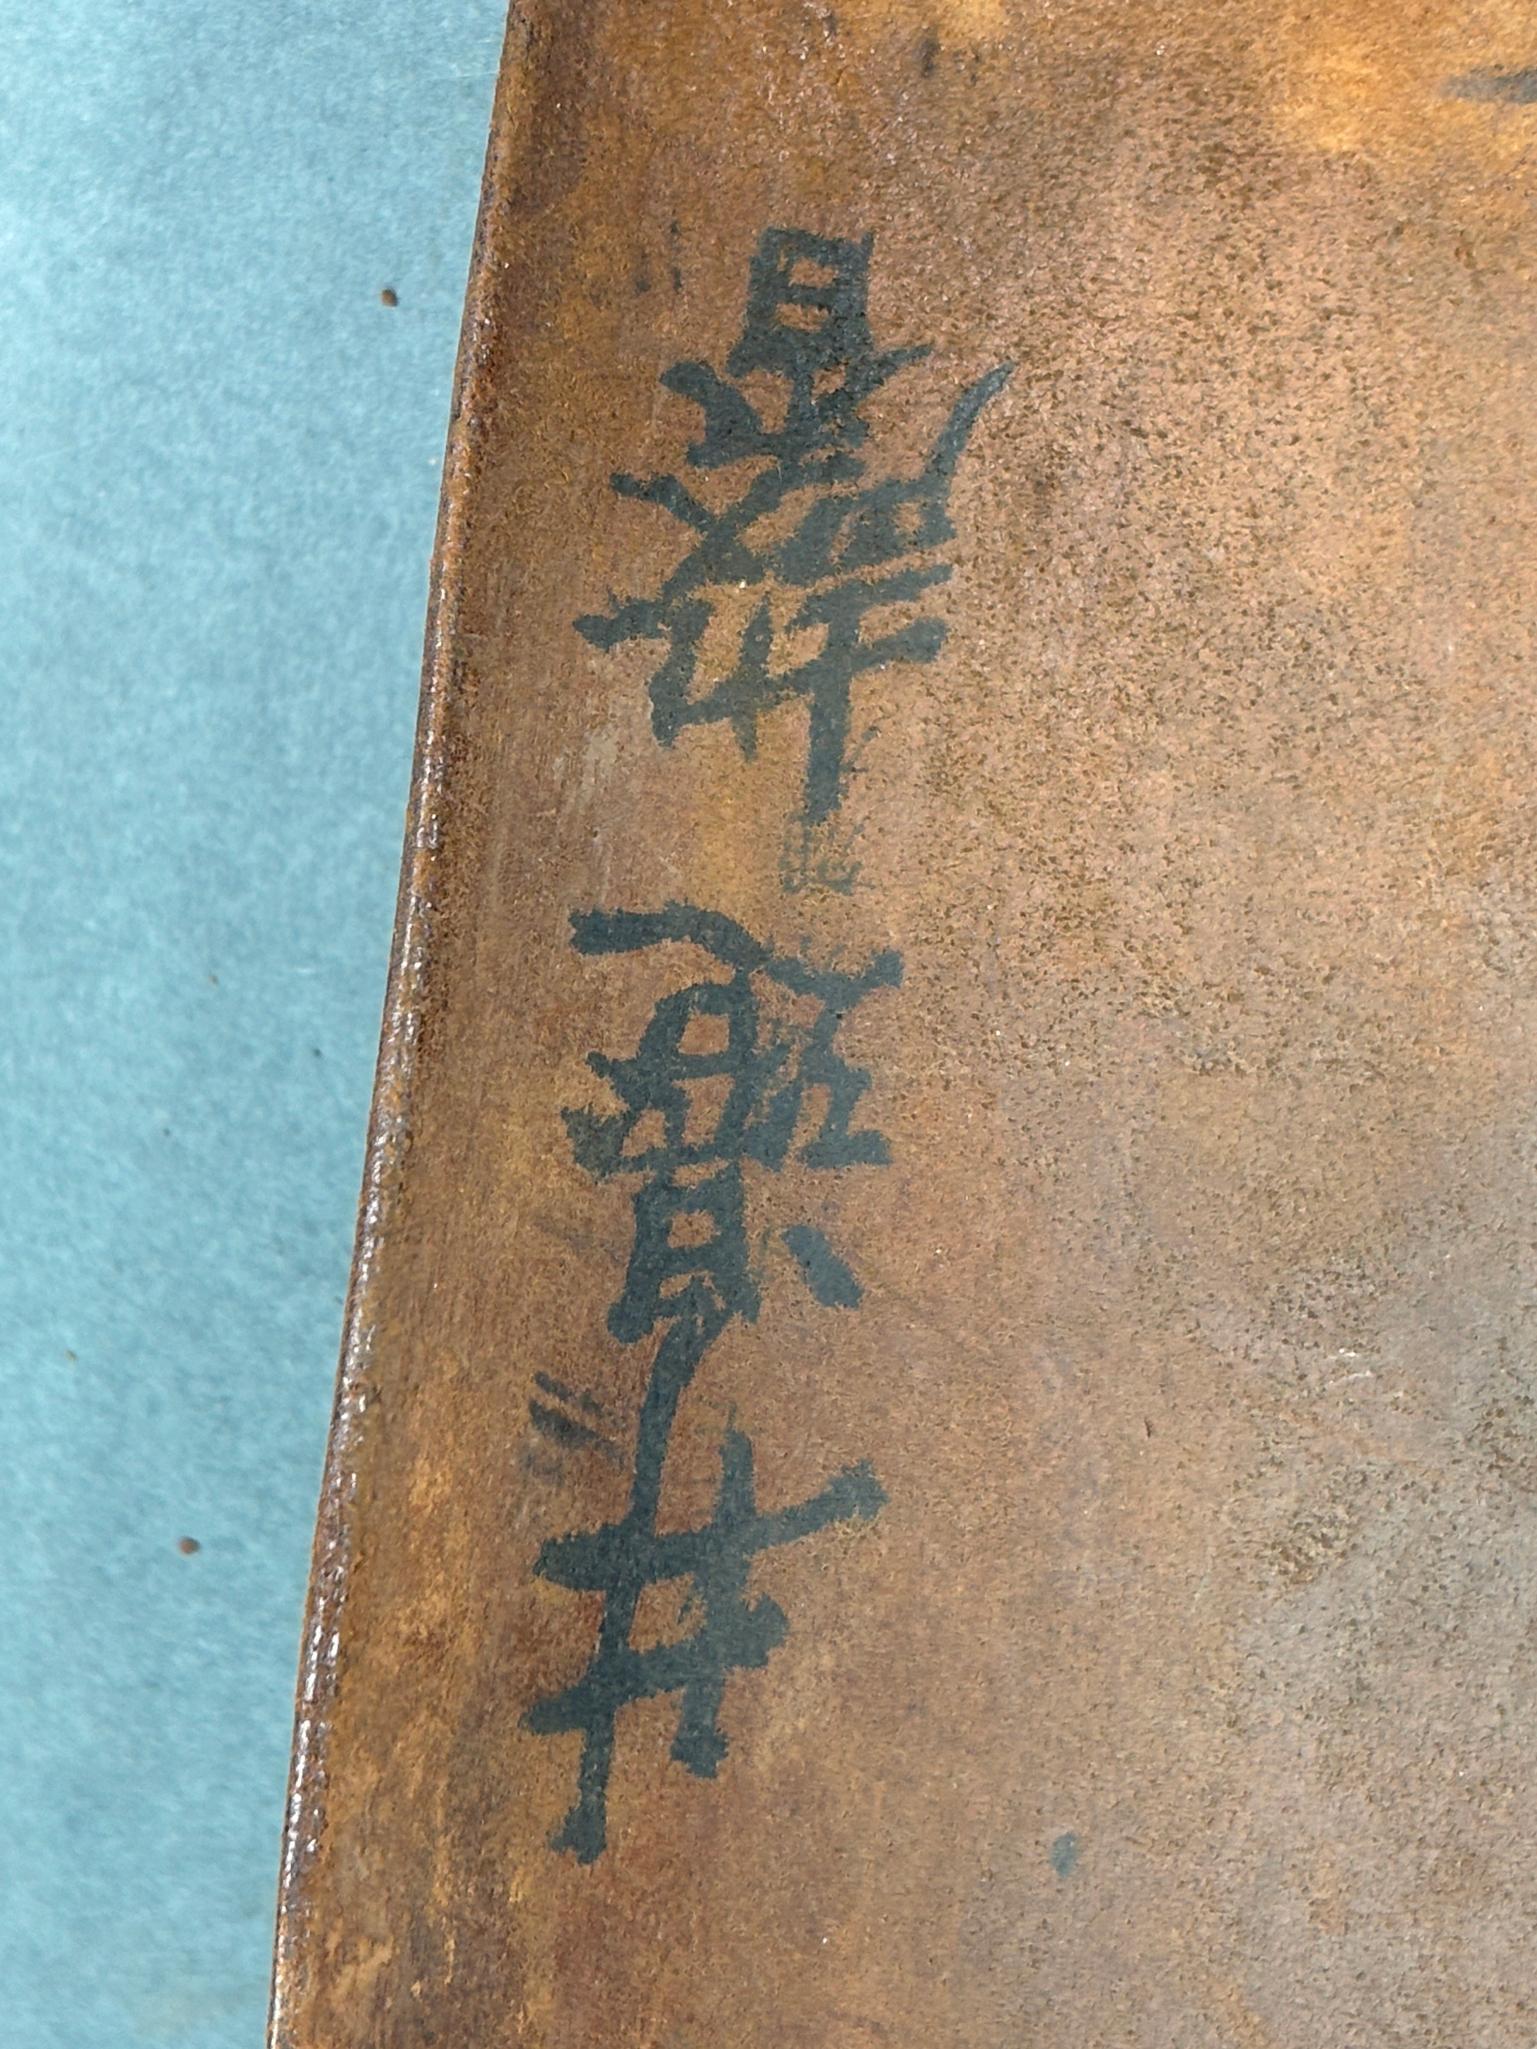 WWII JAPANESE OFFICER LEATHER LEGGINGS IDENTIFIED